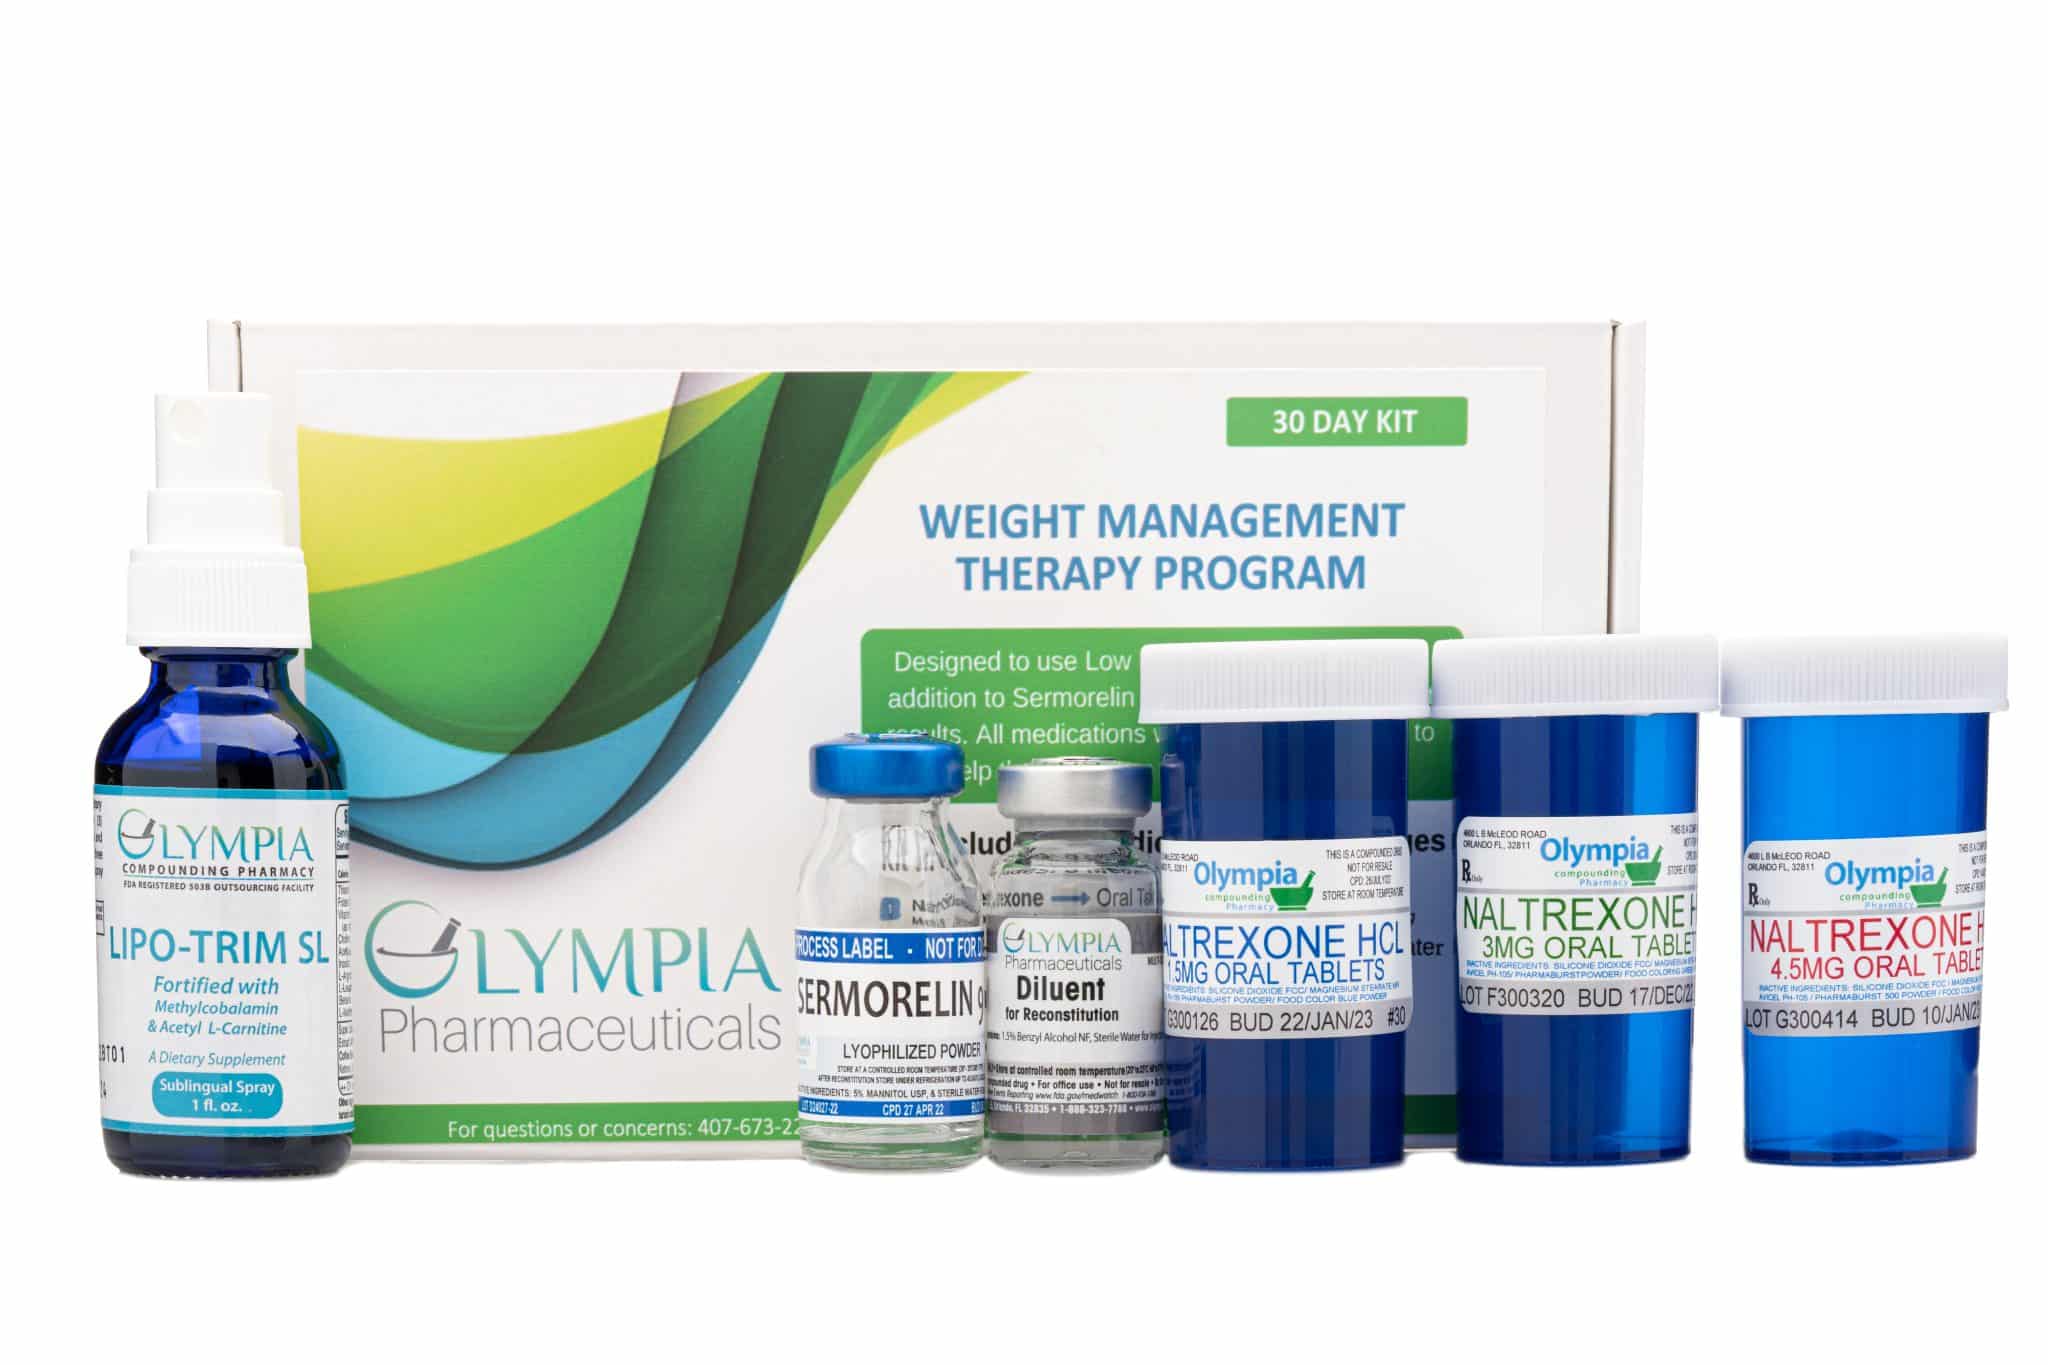 Weight management therapy medications.